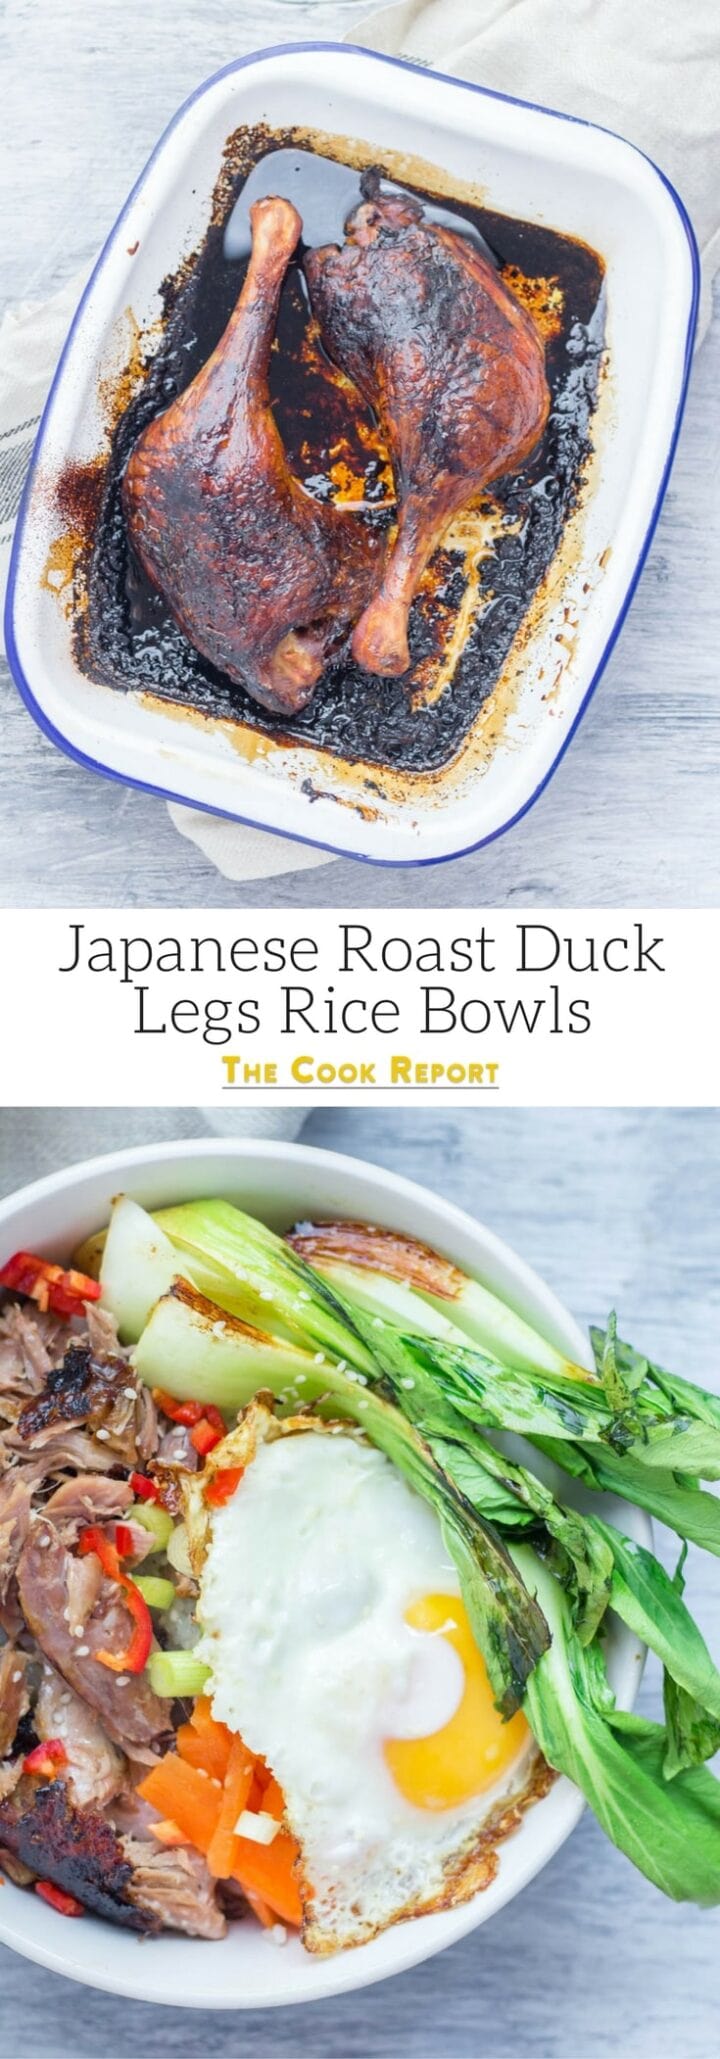 Japanese Roast Duck Legs Rice Bowls • The Cook Report